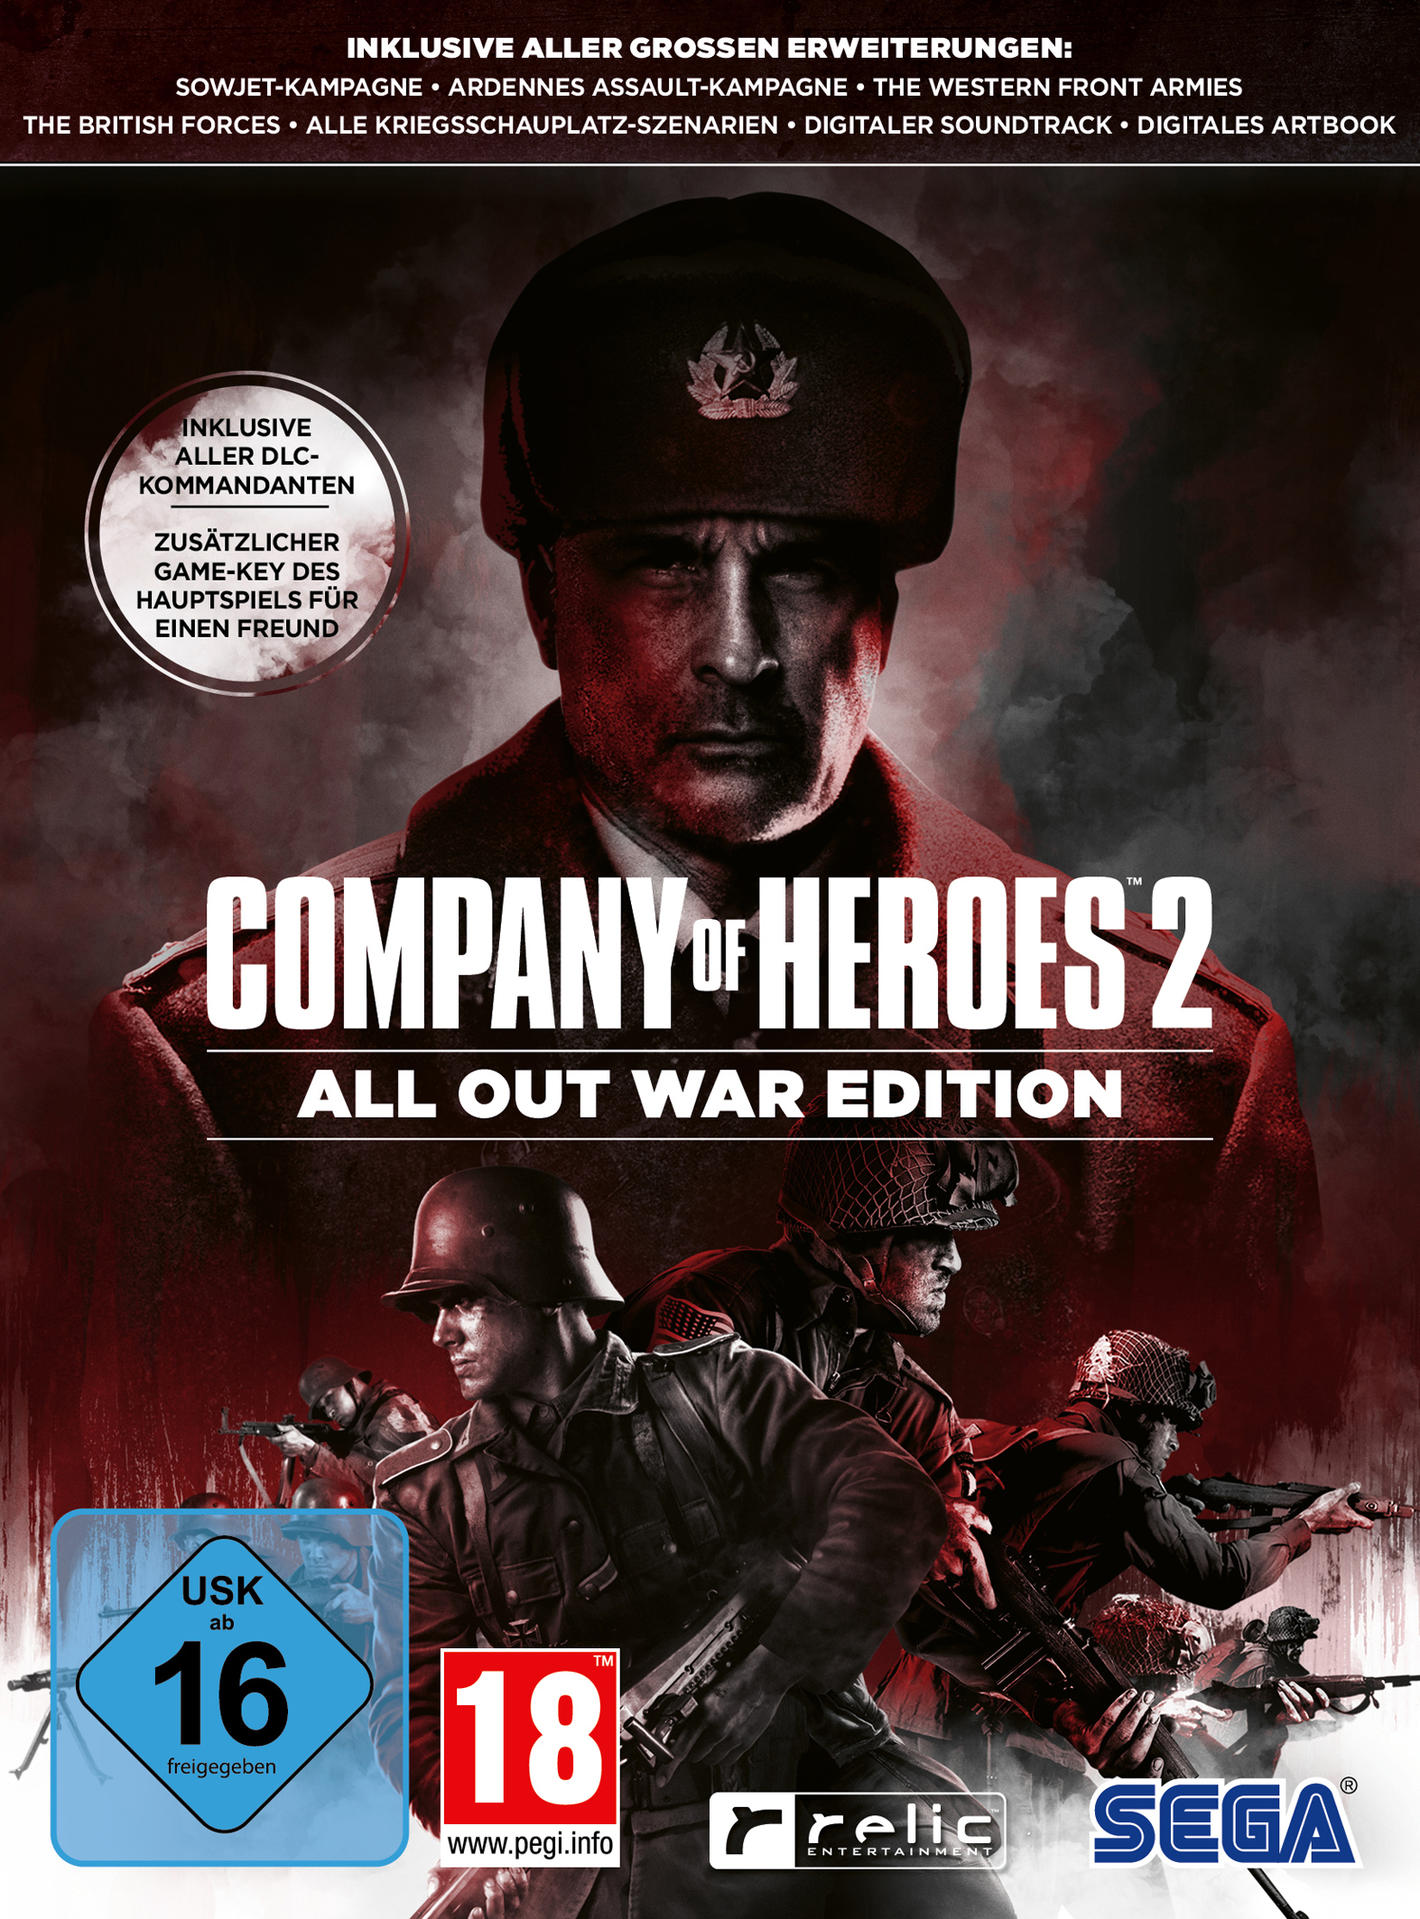 COMPANY OF HEROES 2 EDITION) [PC] (ALL WAR OUT 